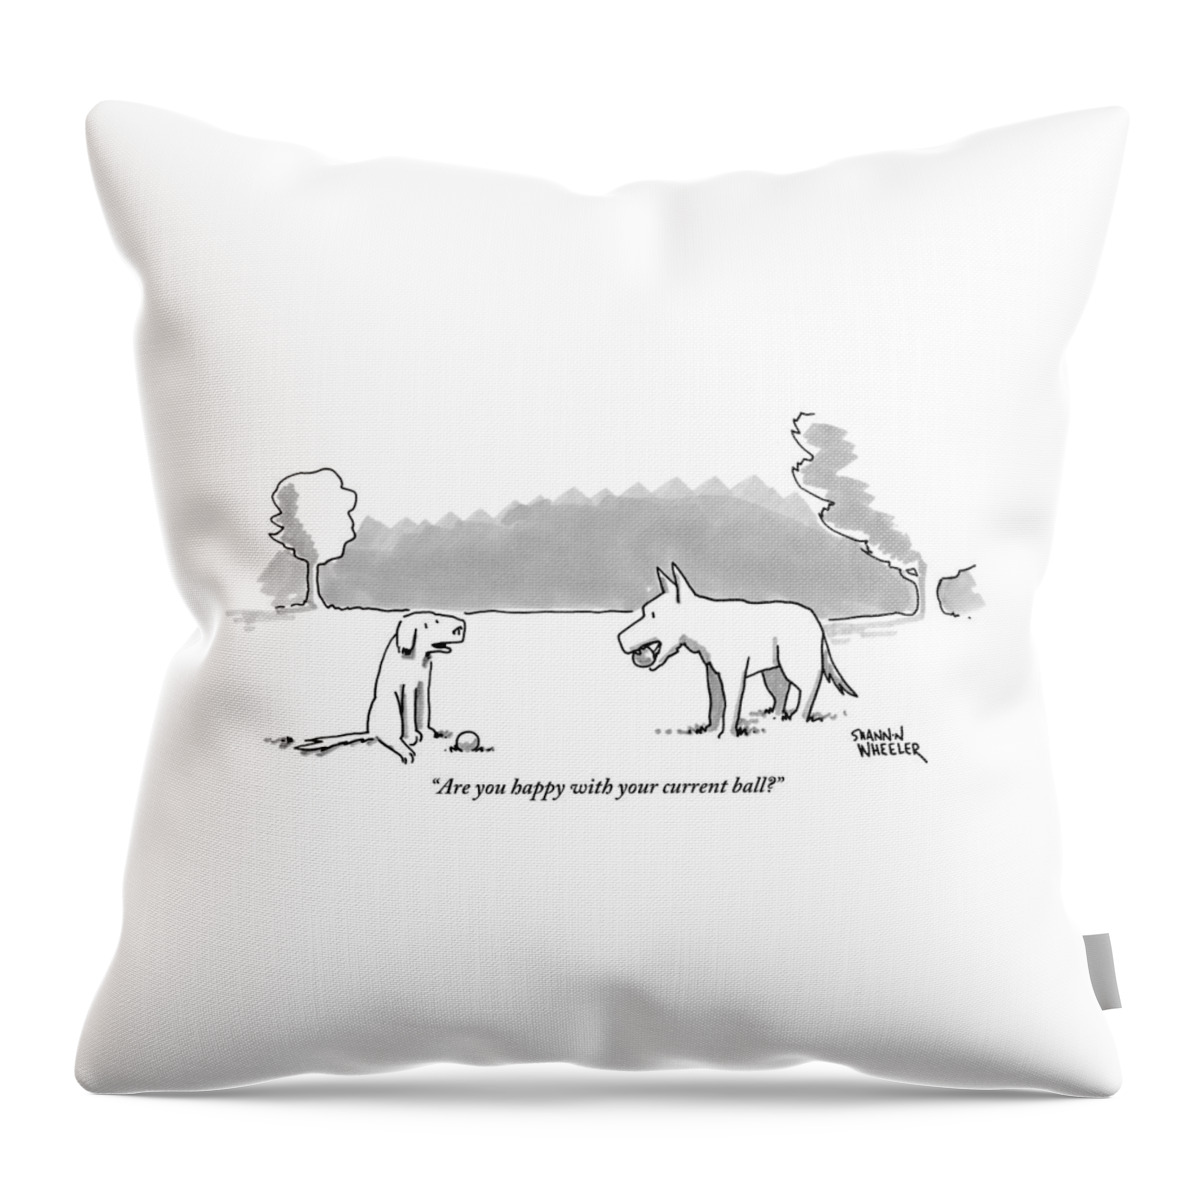 A Dog Sits With A Ball At His Feet. Another Dog Throw Pillow